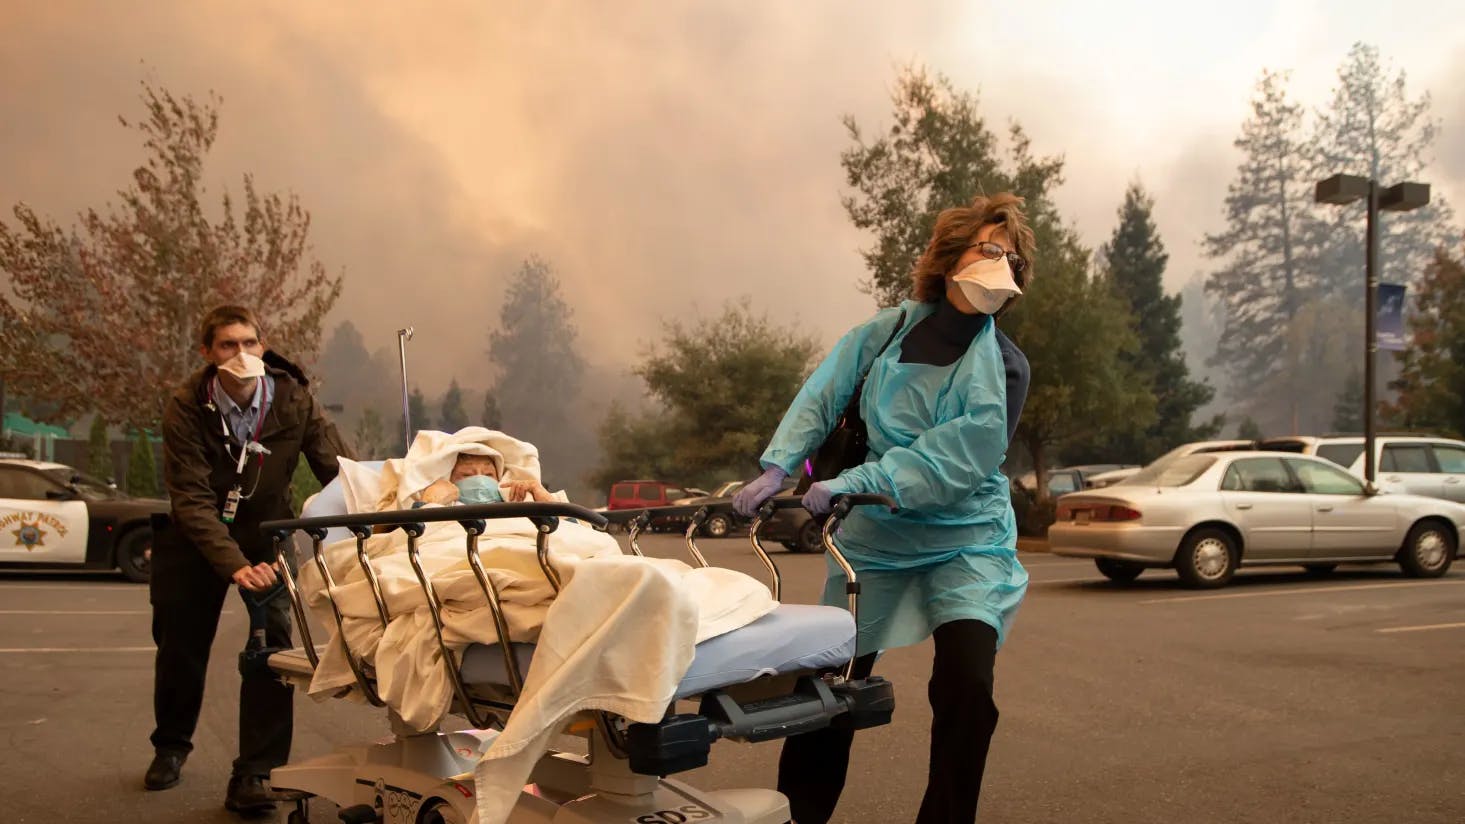 Patients are quickly evacuated from the Feather River Hospital as it burns down during the Camp fire in Paradise, California